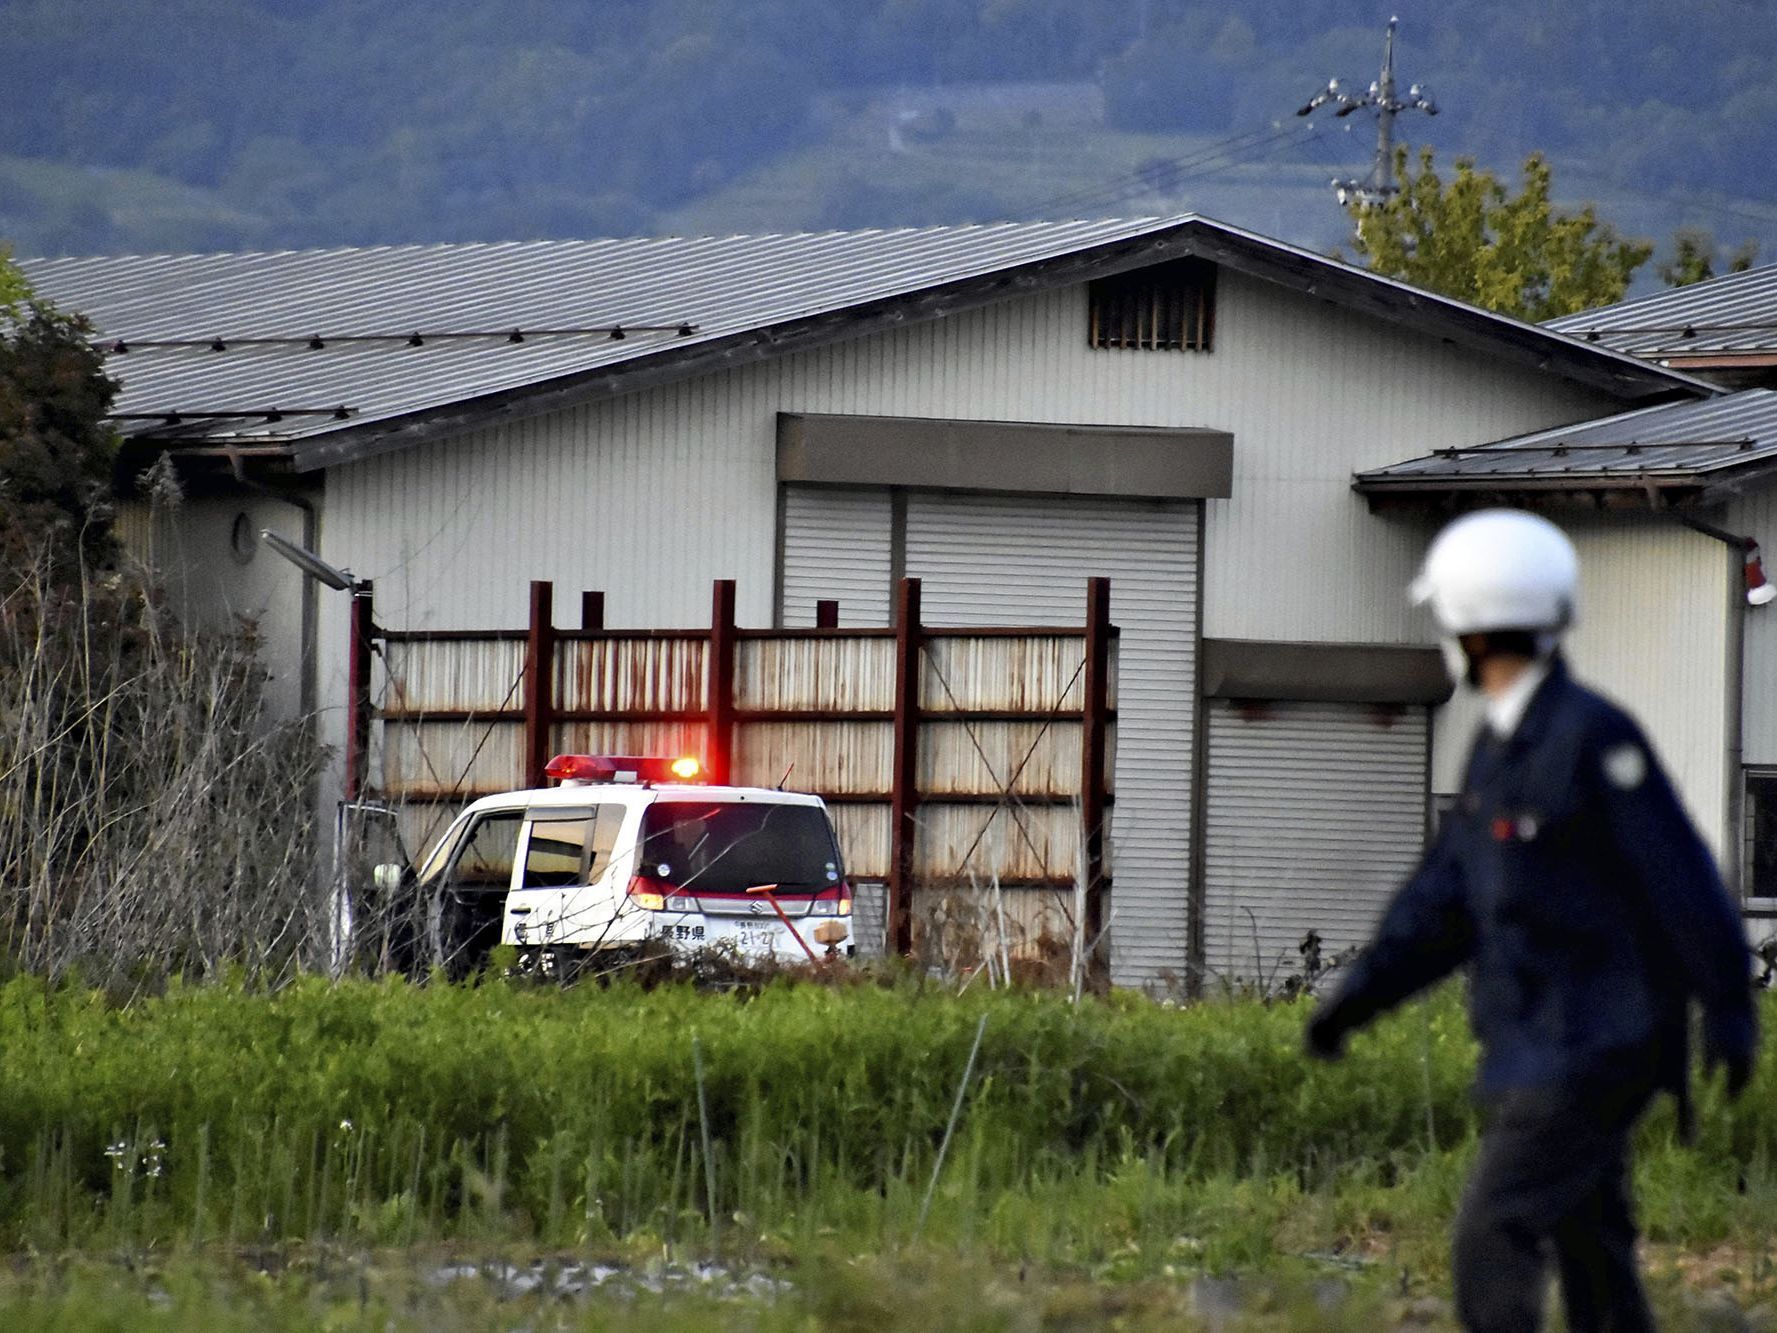 Four Dead In Japan Shooting And Stabbing Attack, Suspect Apprehended